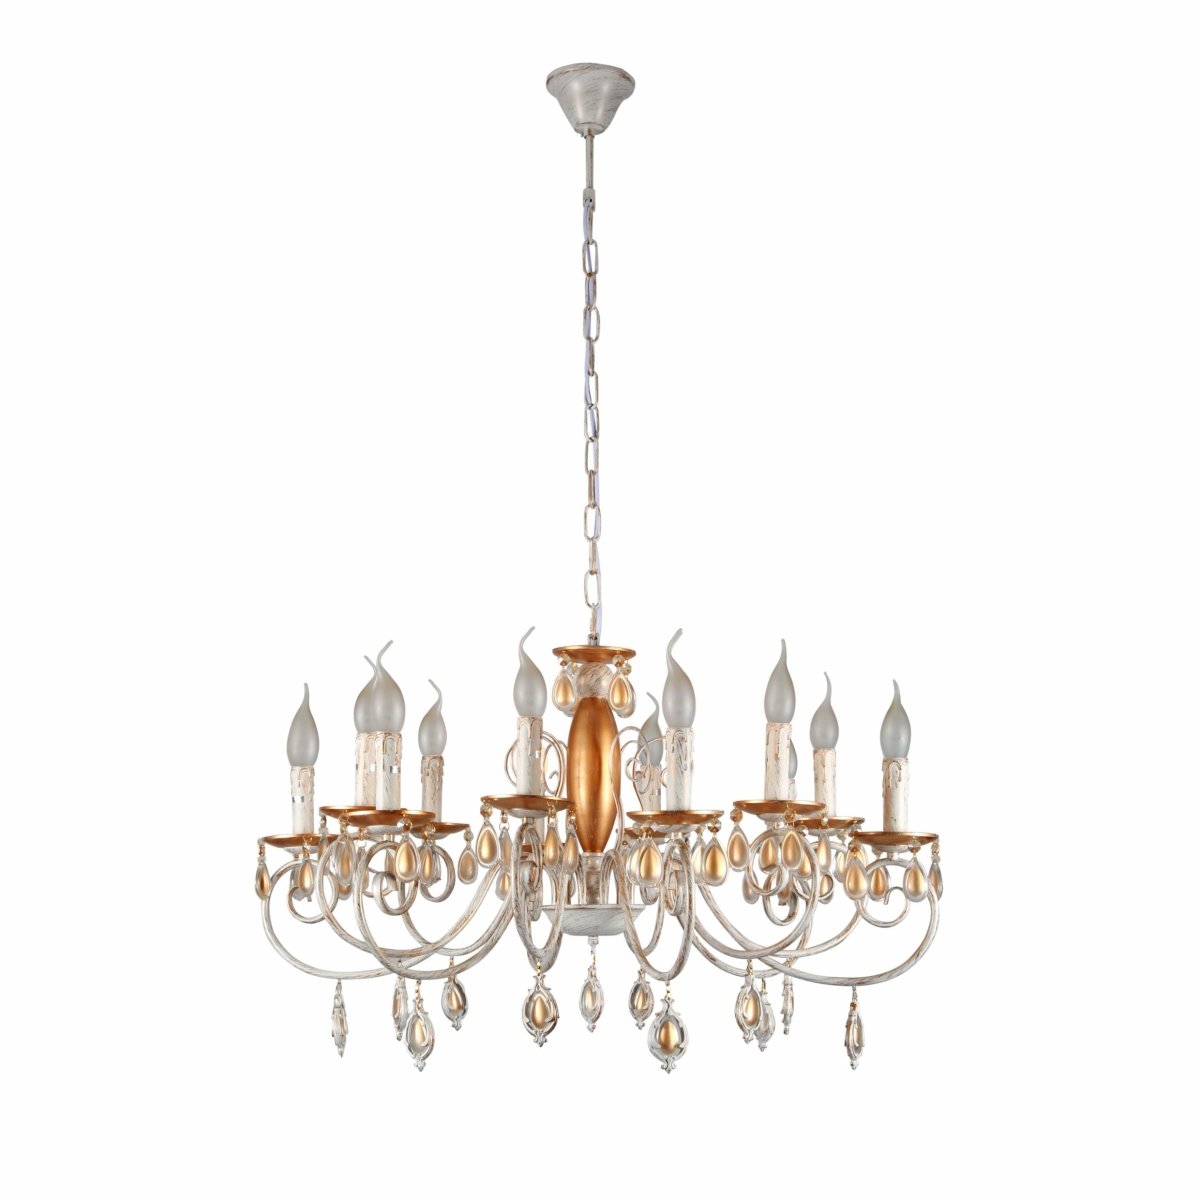 Main image of Amber Crystal Gold and White Metal 12 Arm Chandelier with E14 Fitting | TEKLED 158-19445